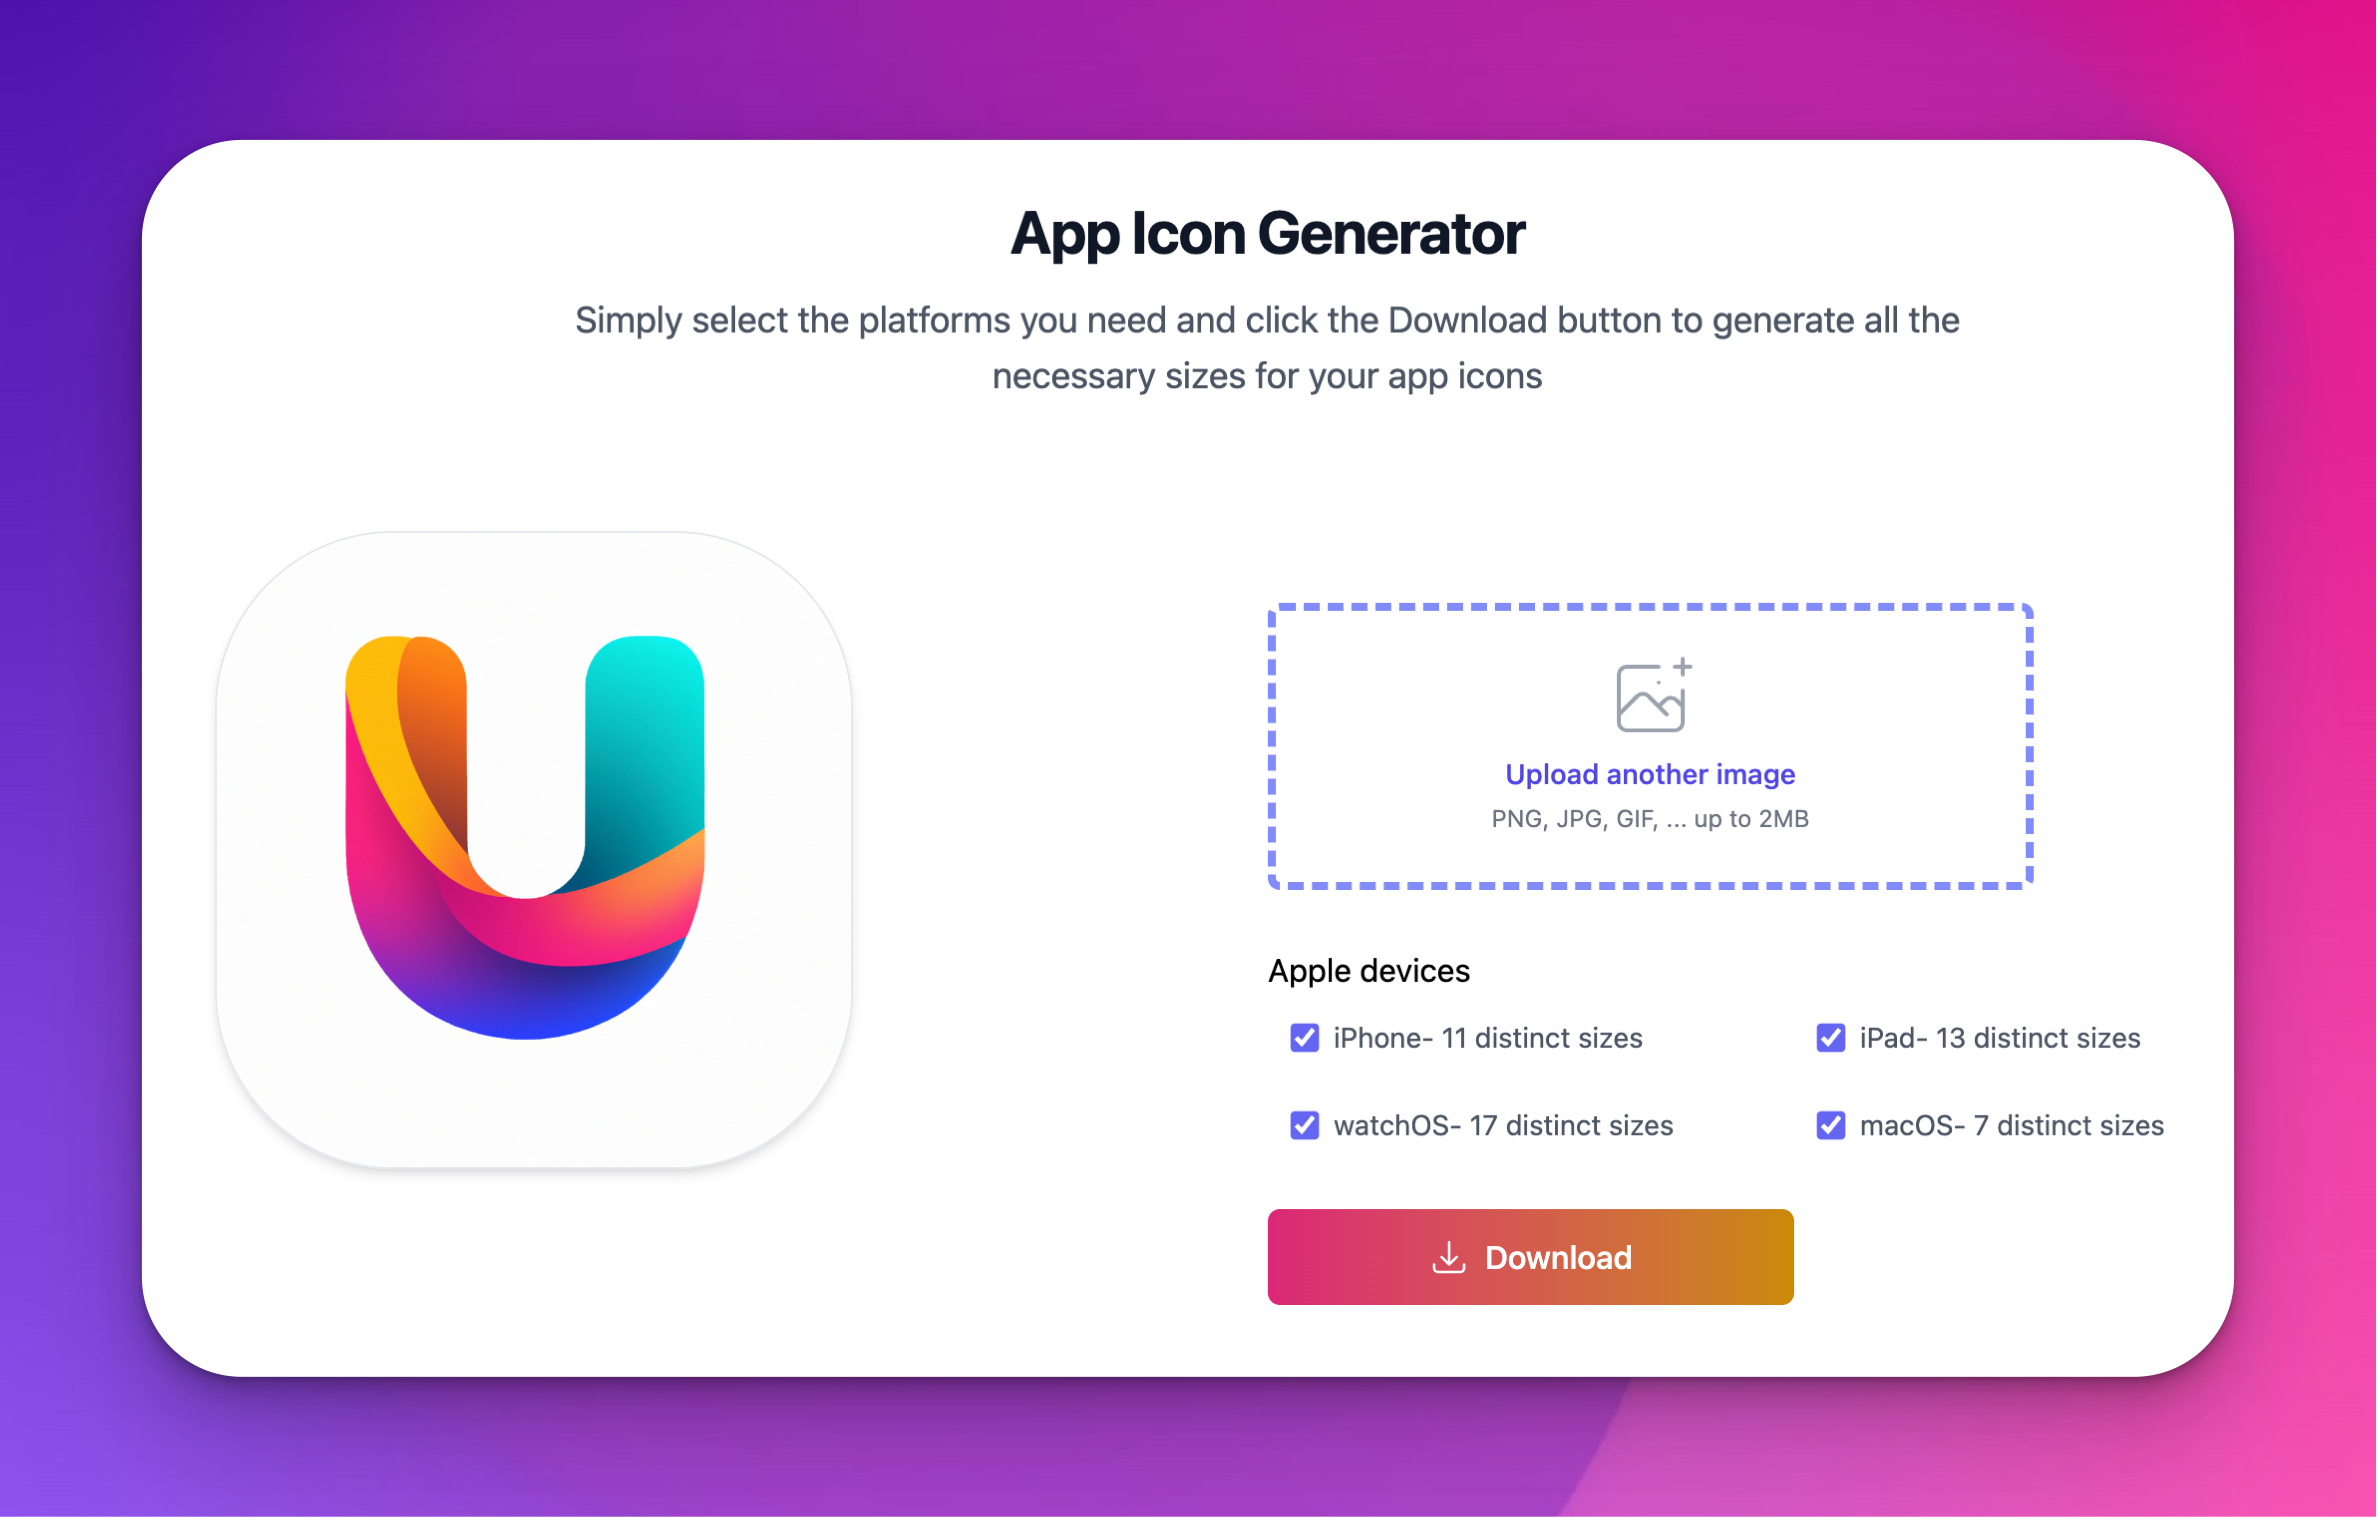 A demo of generating app icons that follow exactly Apple's design guideline